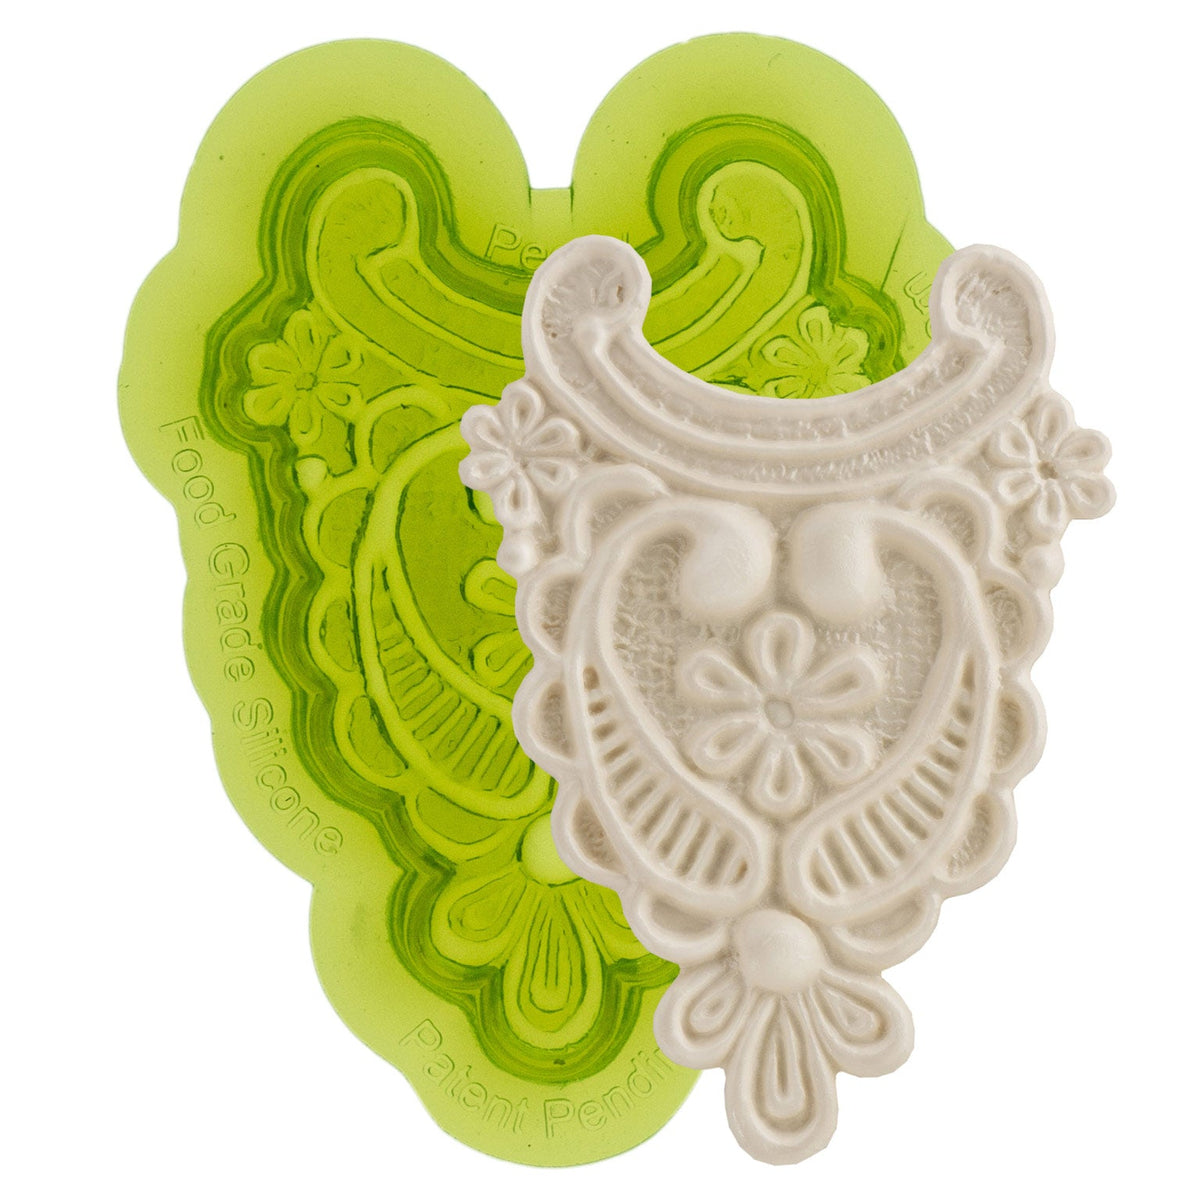 Peggy Lace Silicone Sprig Mold for Ceramics by Marvelous Molds